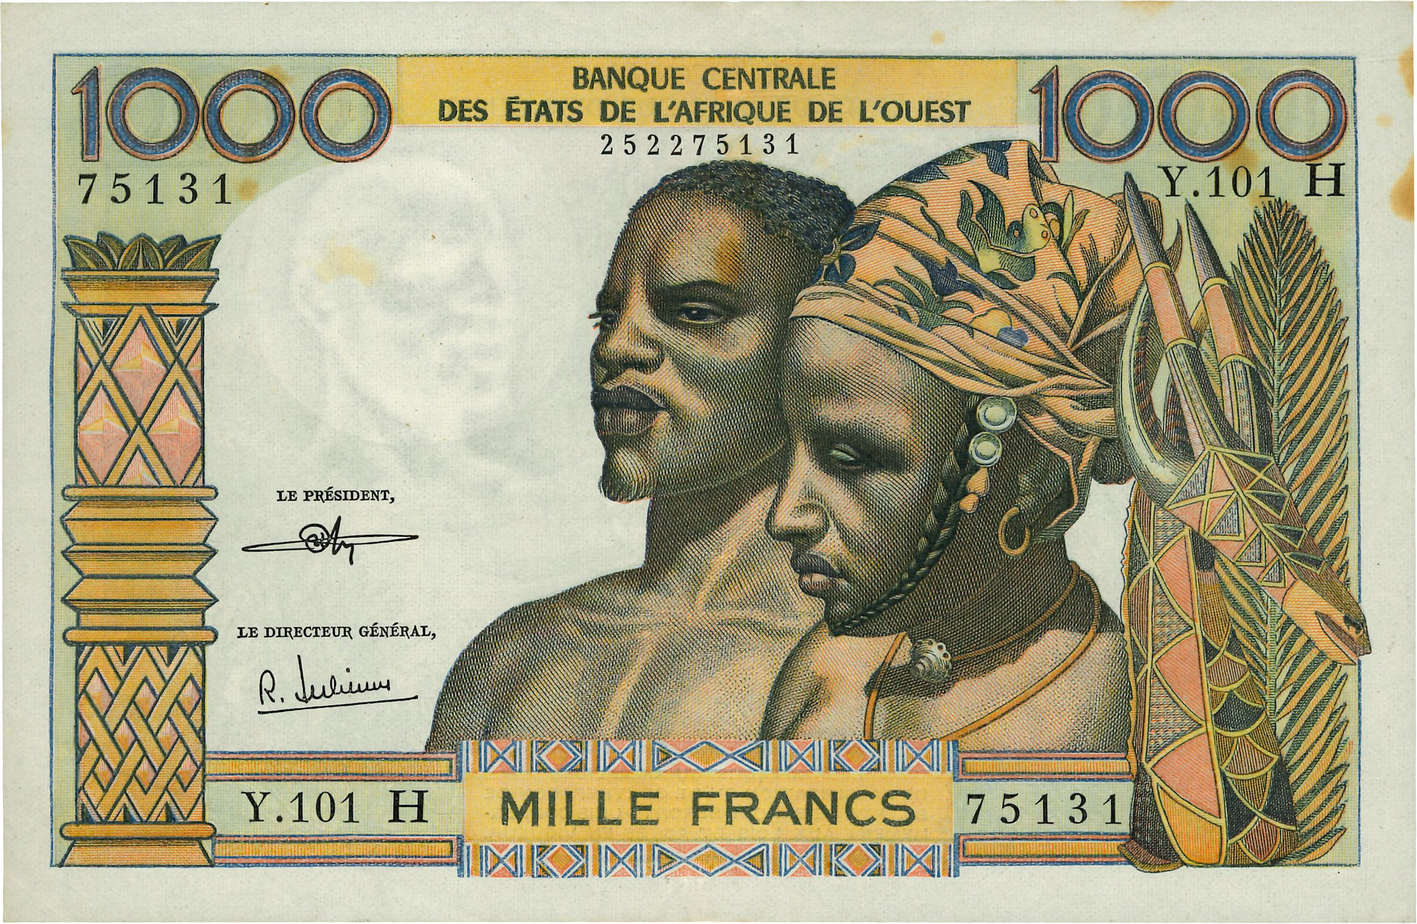 1000 Francs WEST AFRICAN STATES  1972 P.603Hj XF